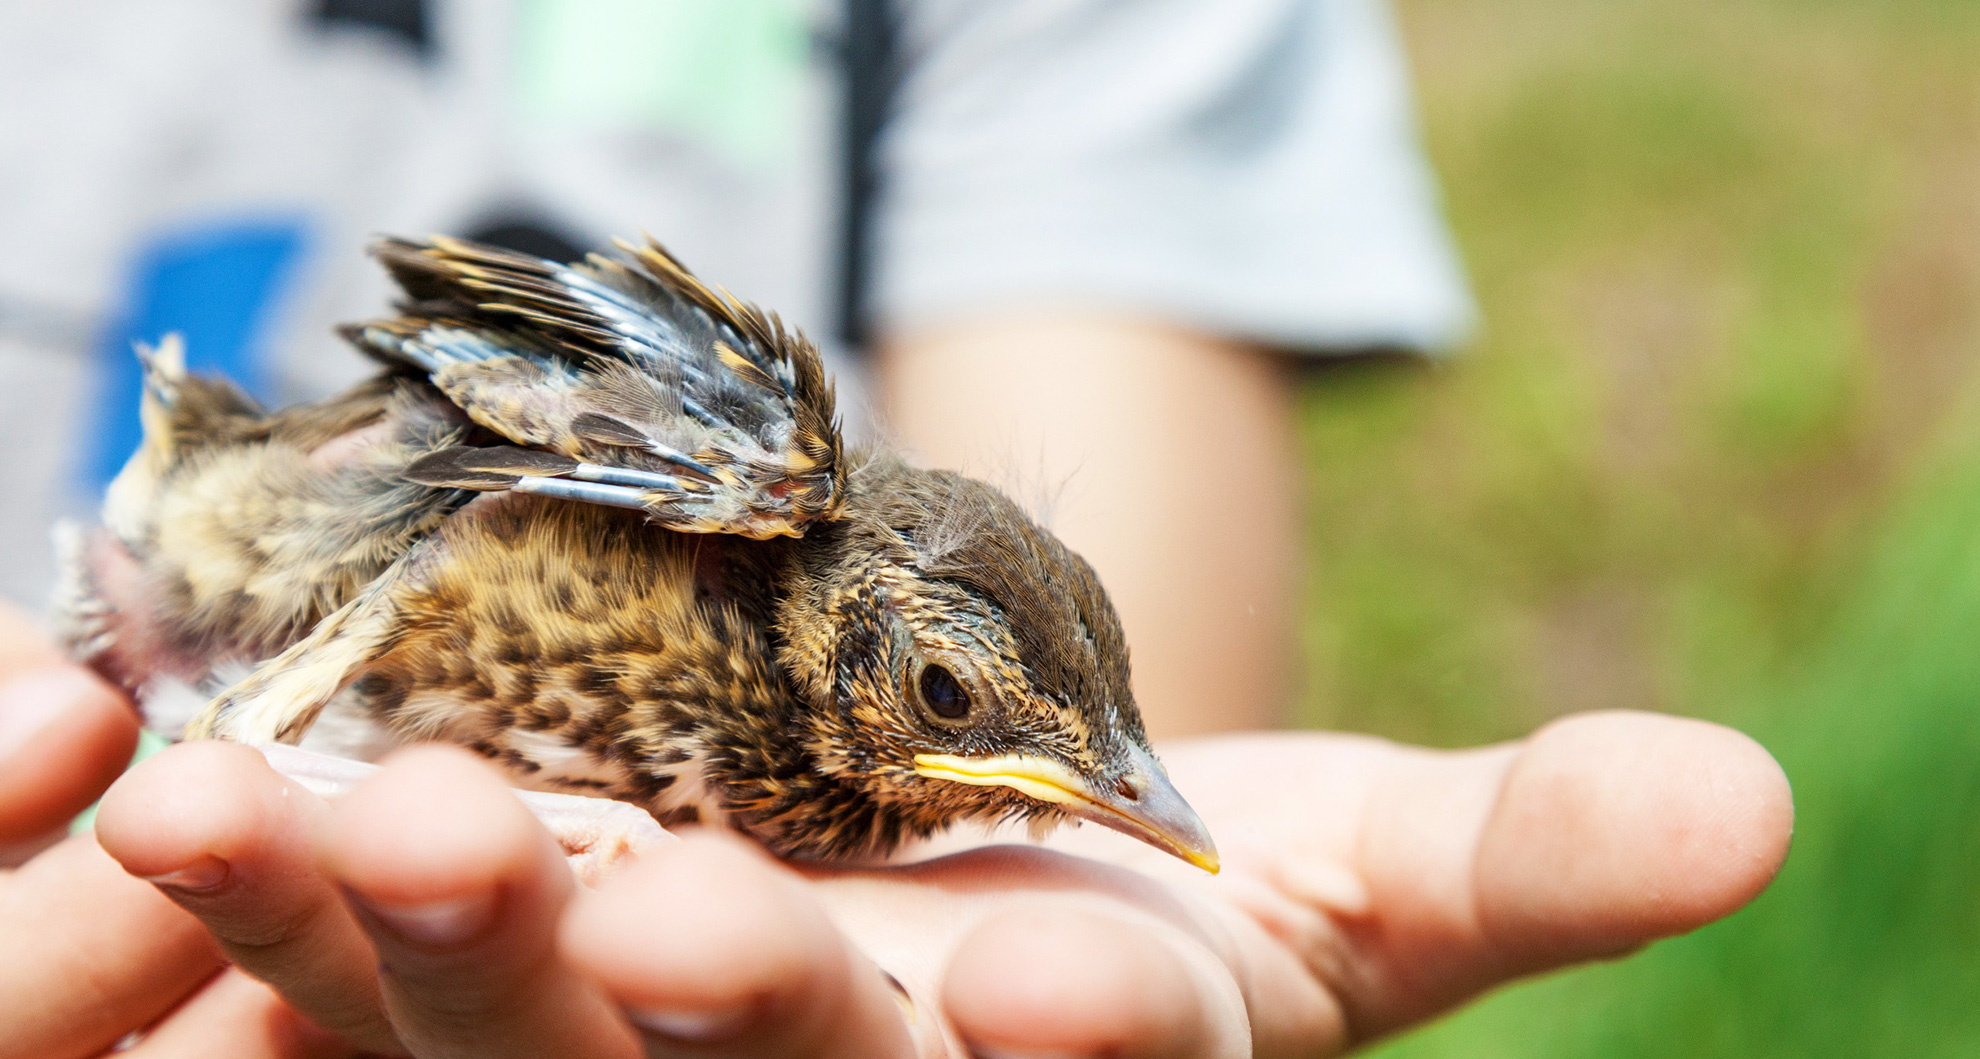 Bird Emergencies and First Aid